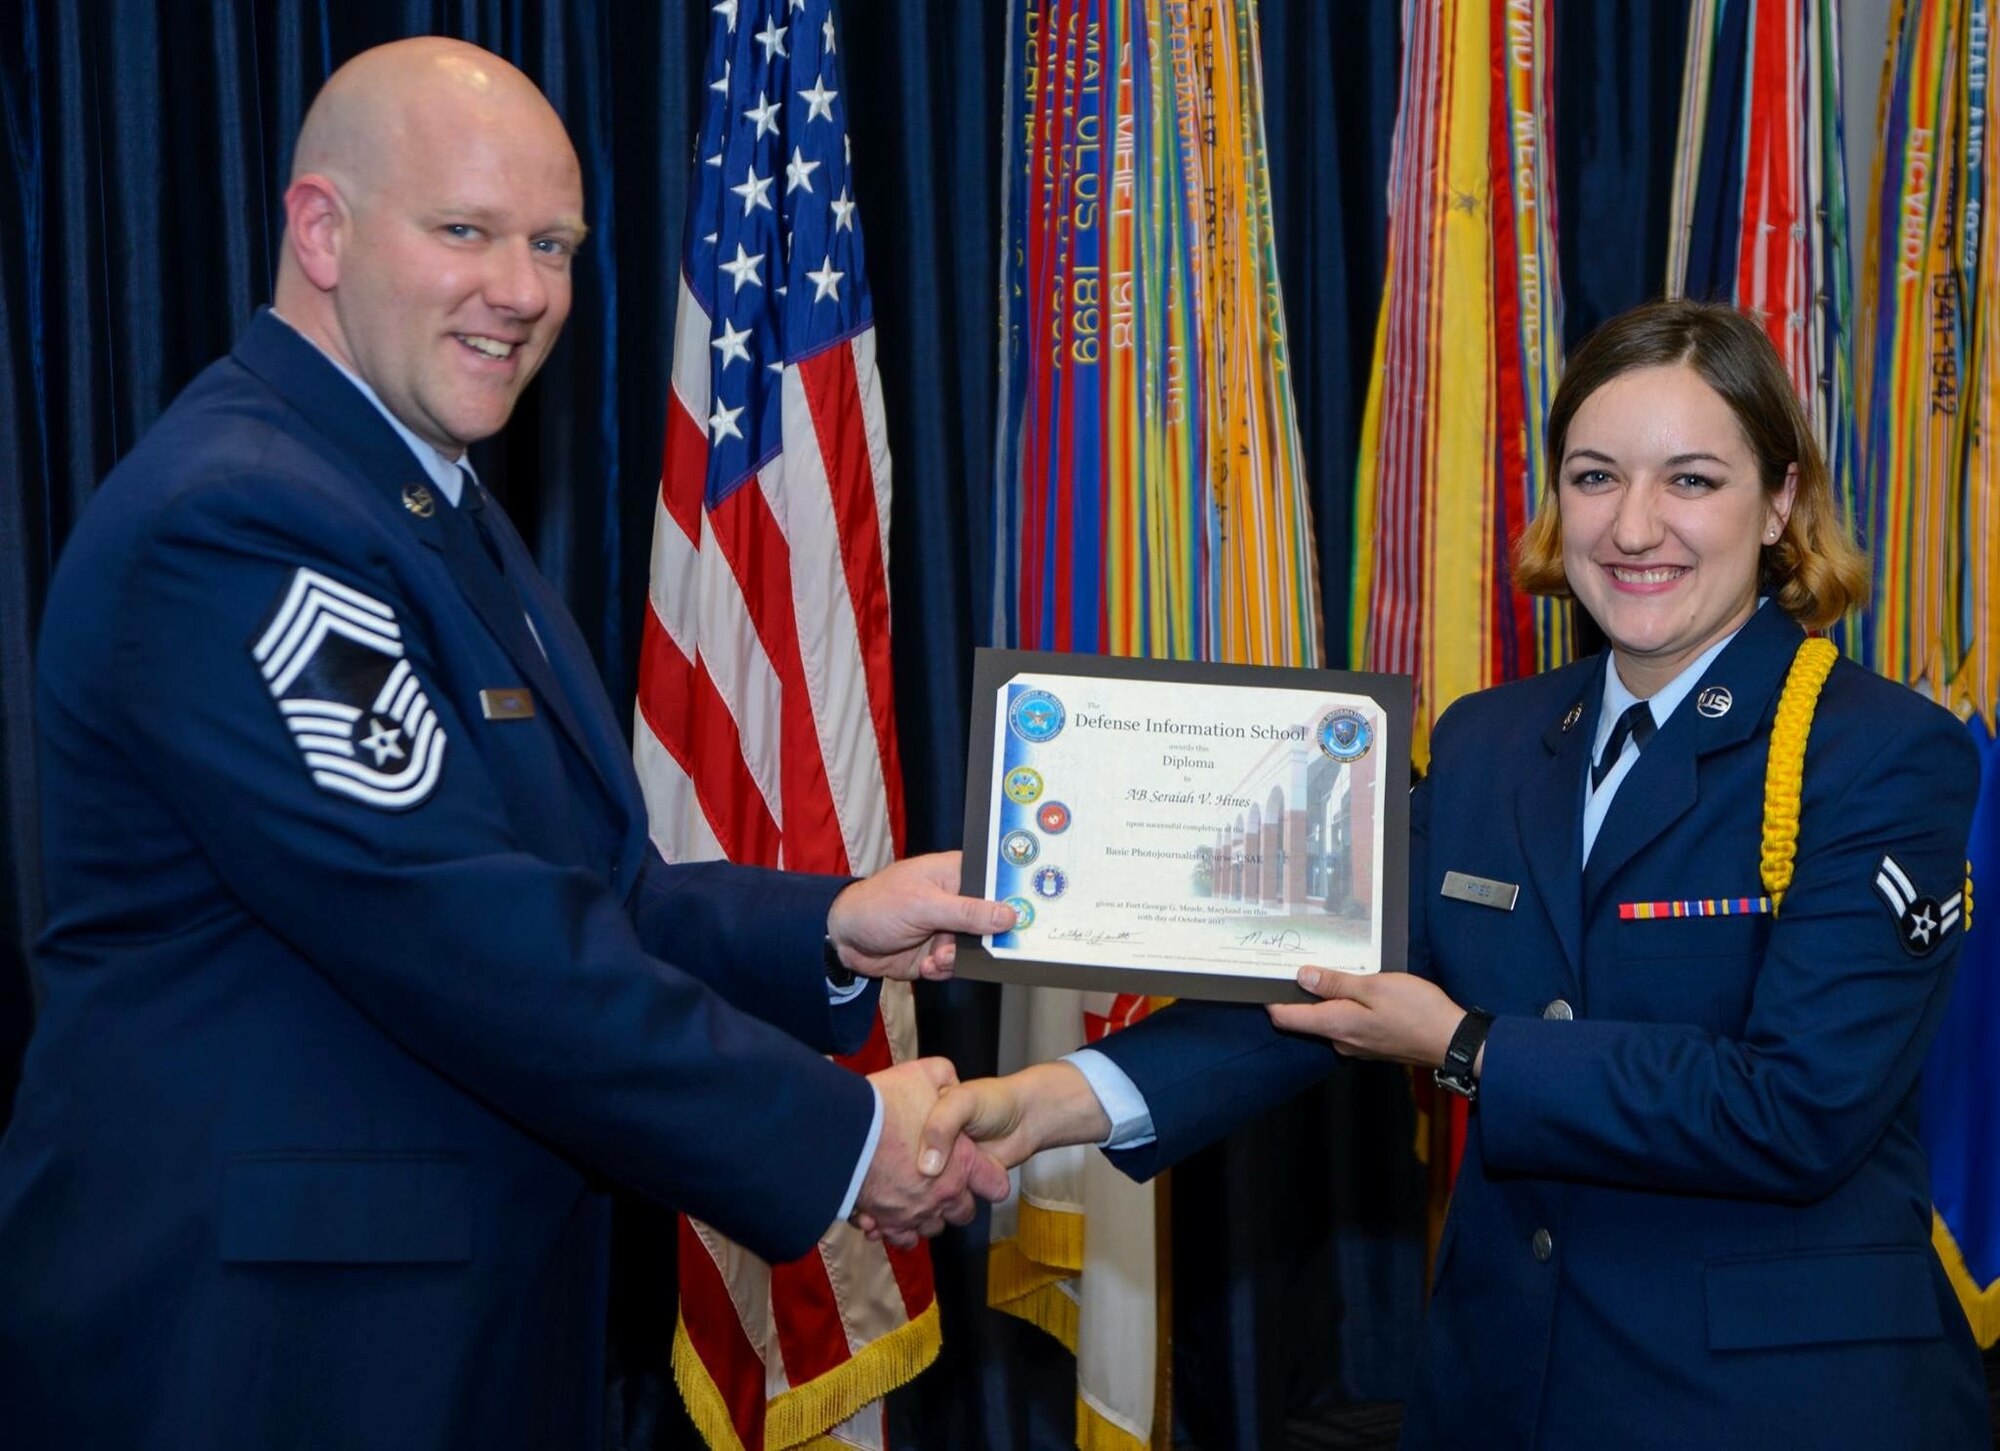 After 87 training days graduates of the Defense Information School receive a certificate acknowledging they have completed their initial training in the public affairs career field. (Courtesy photo)